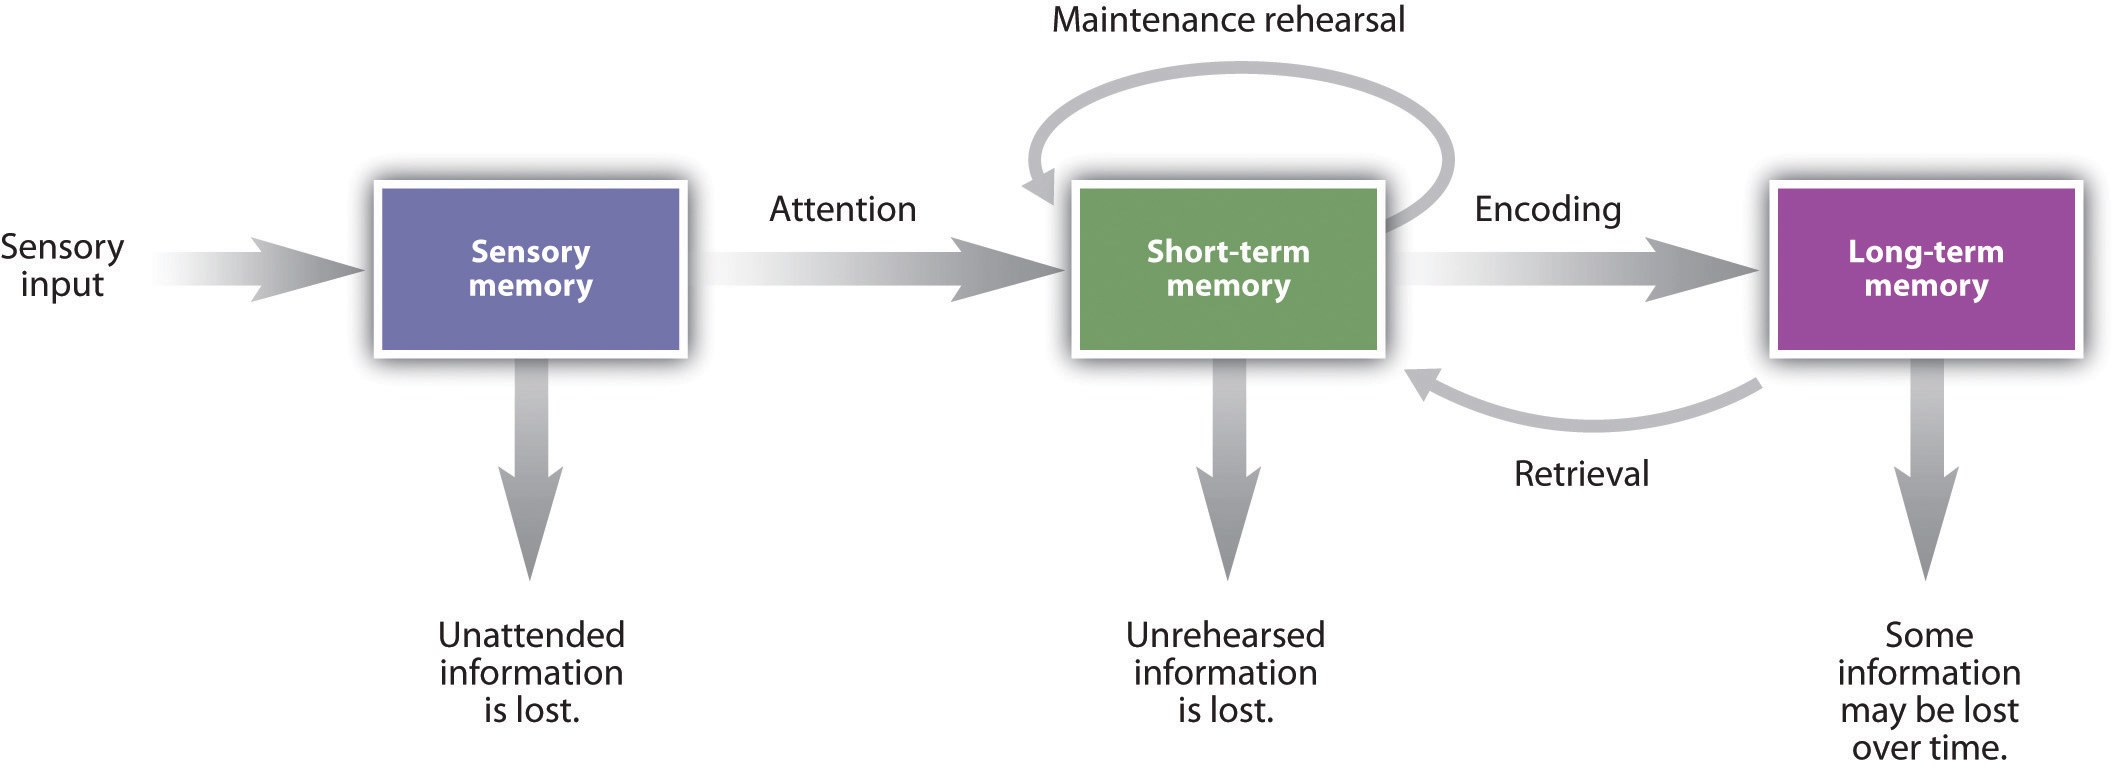 Diagram of Three stage model of memory.  The three stages are sensory, short-term, and long-term memory.